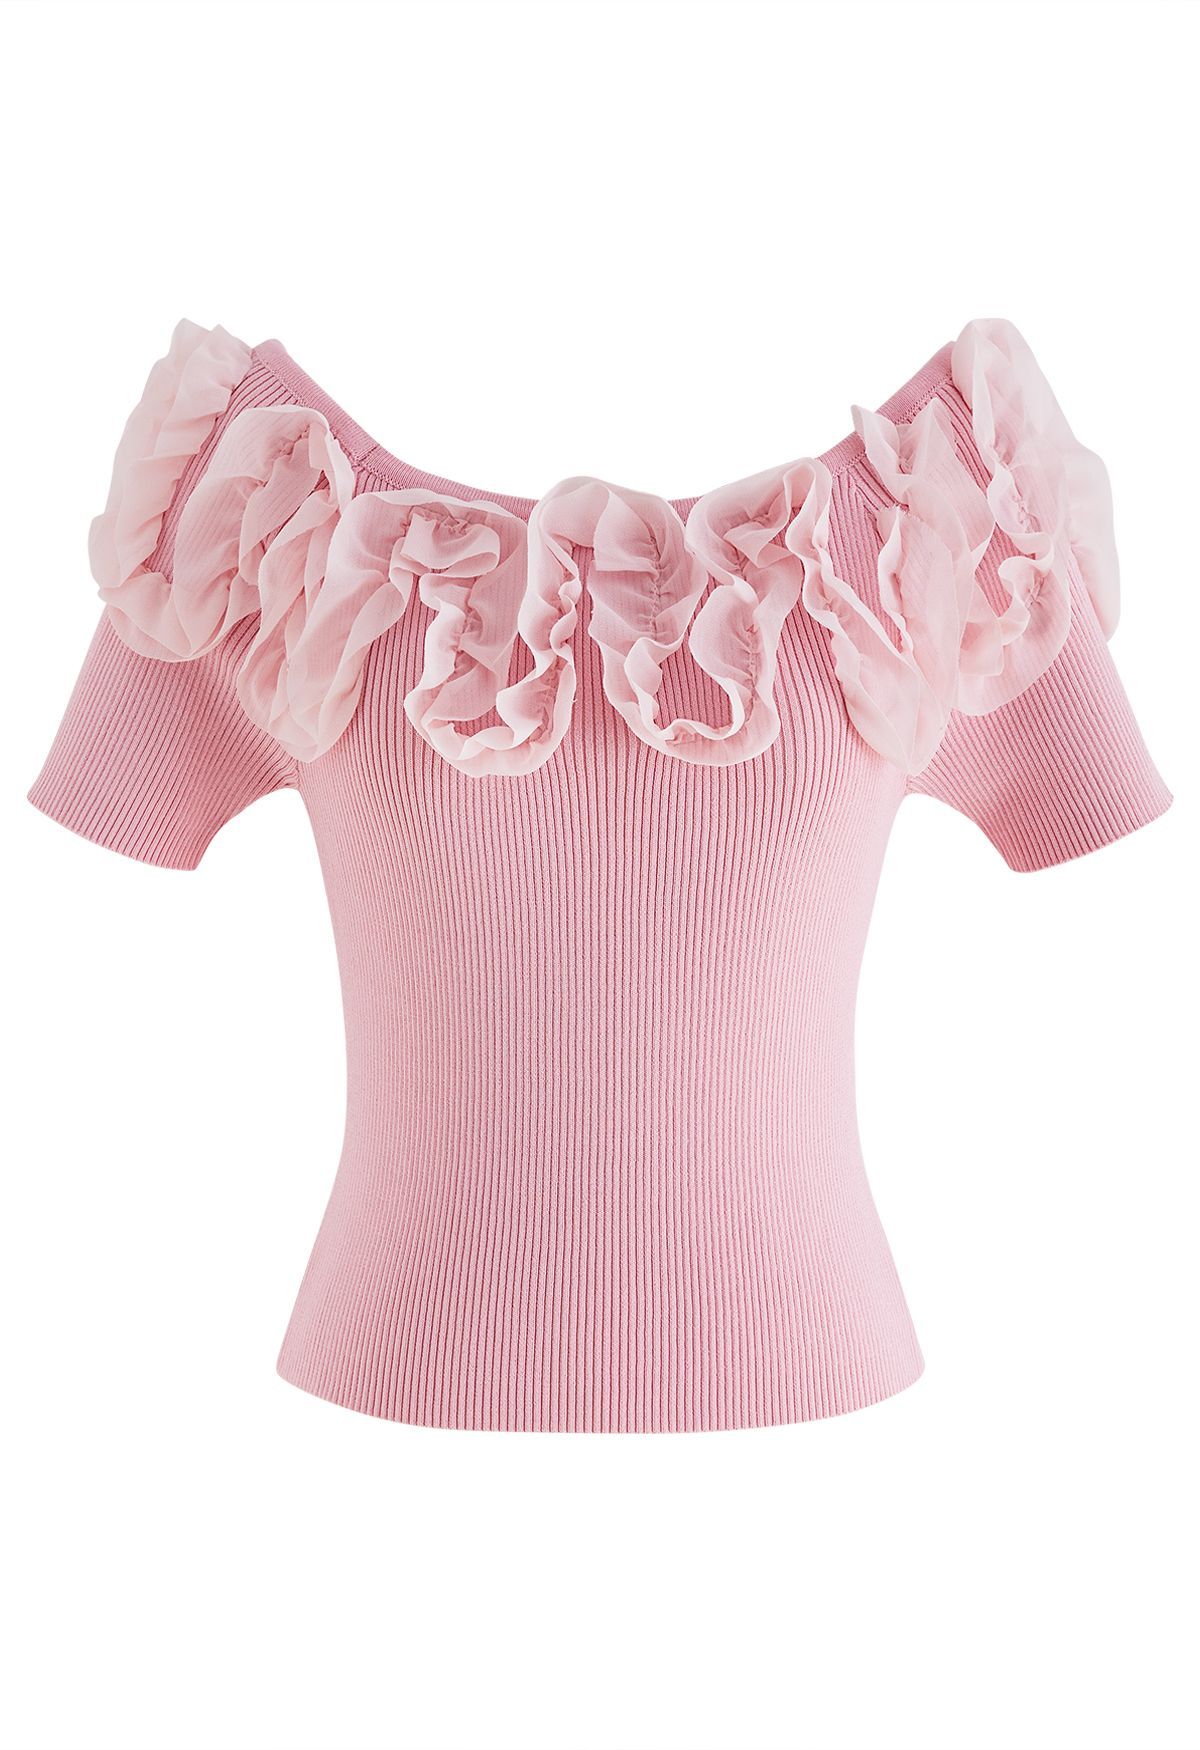 Ruffle Mesh Boat Neck Knit Top in Pink | Chicwish